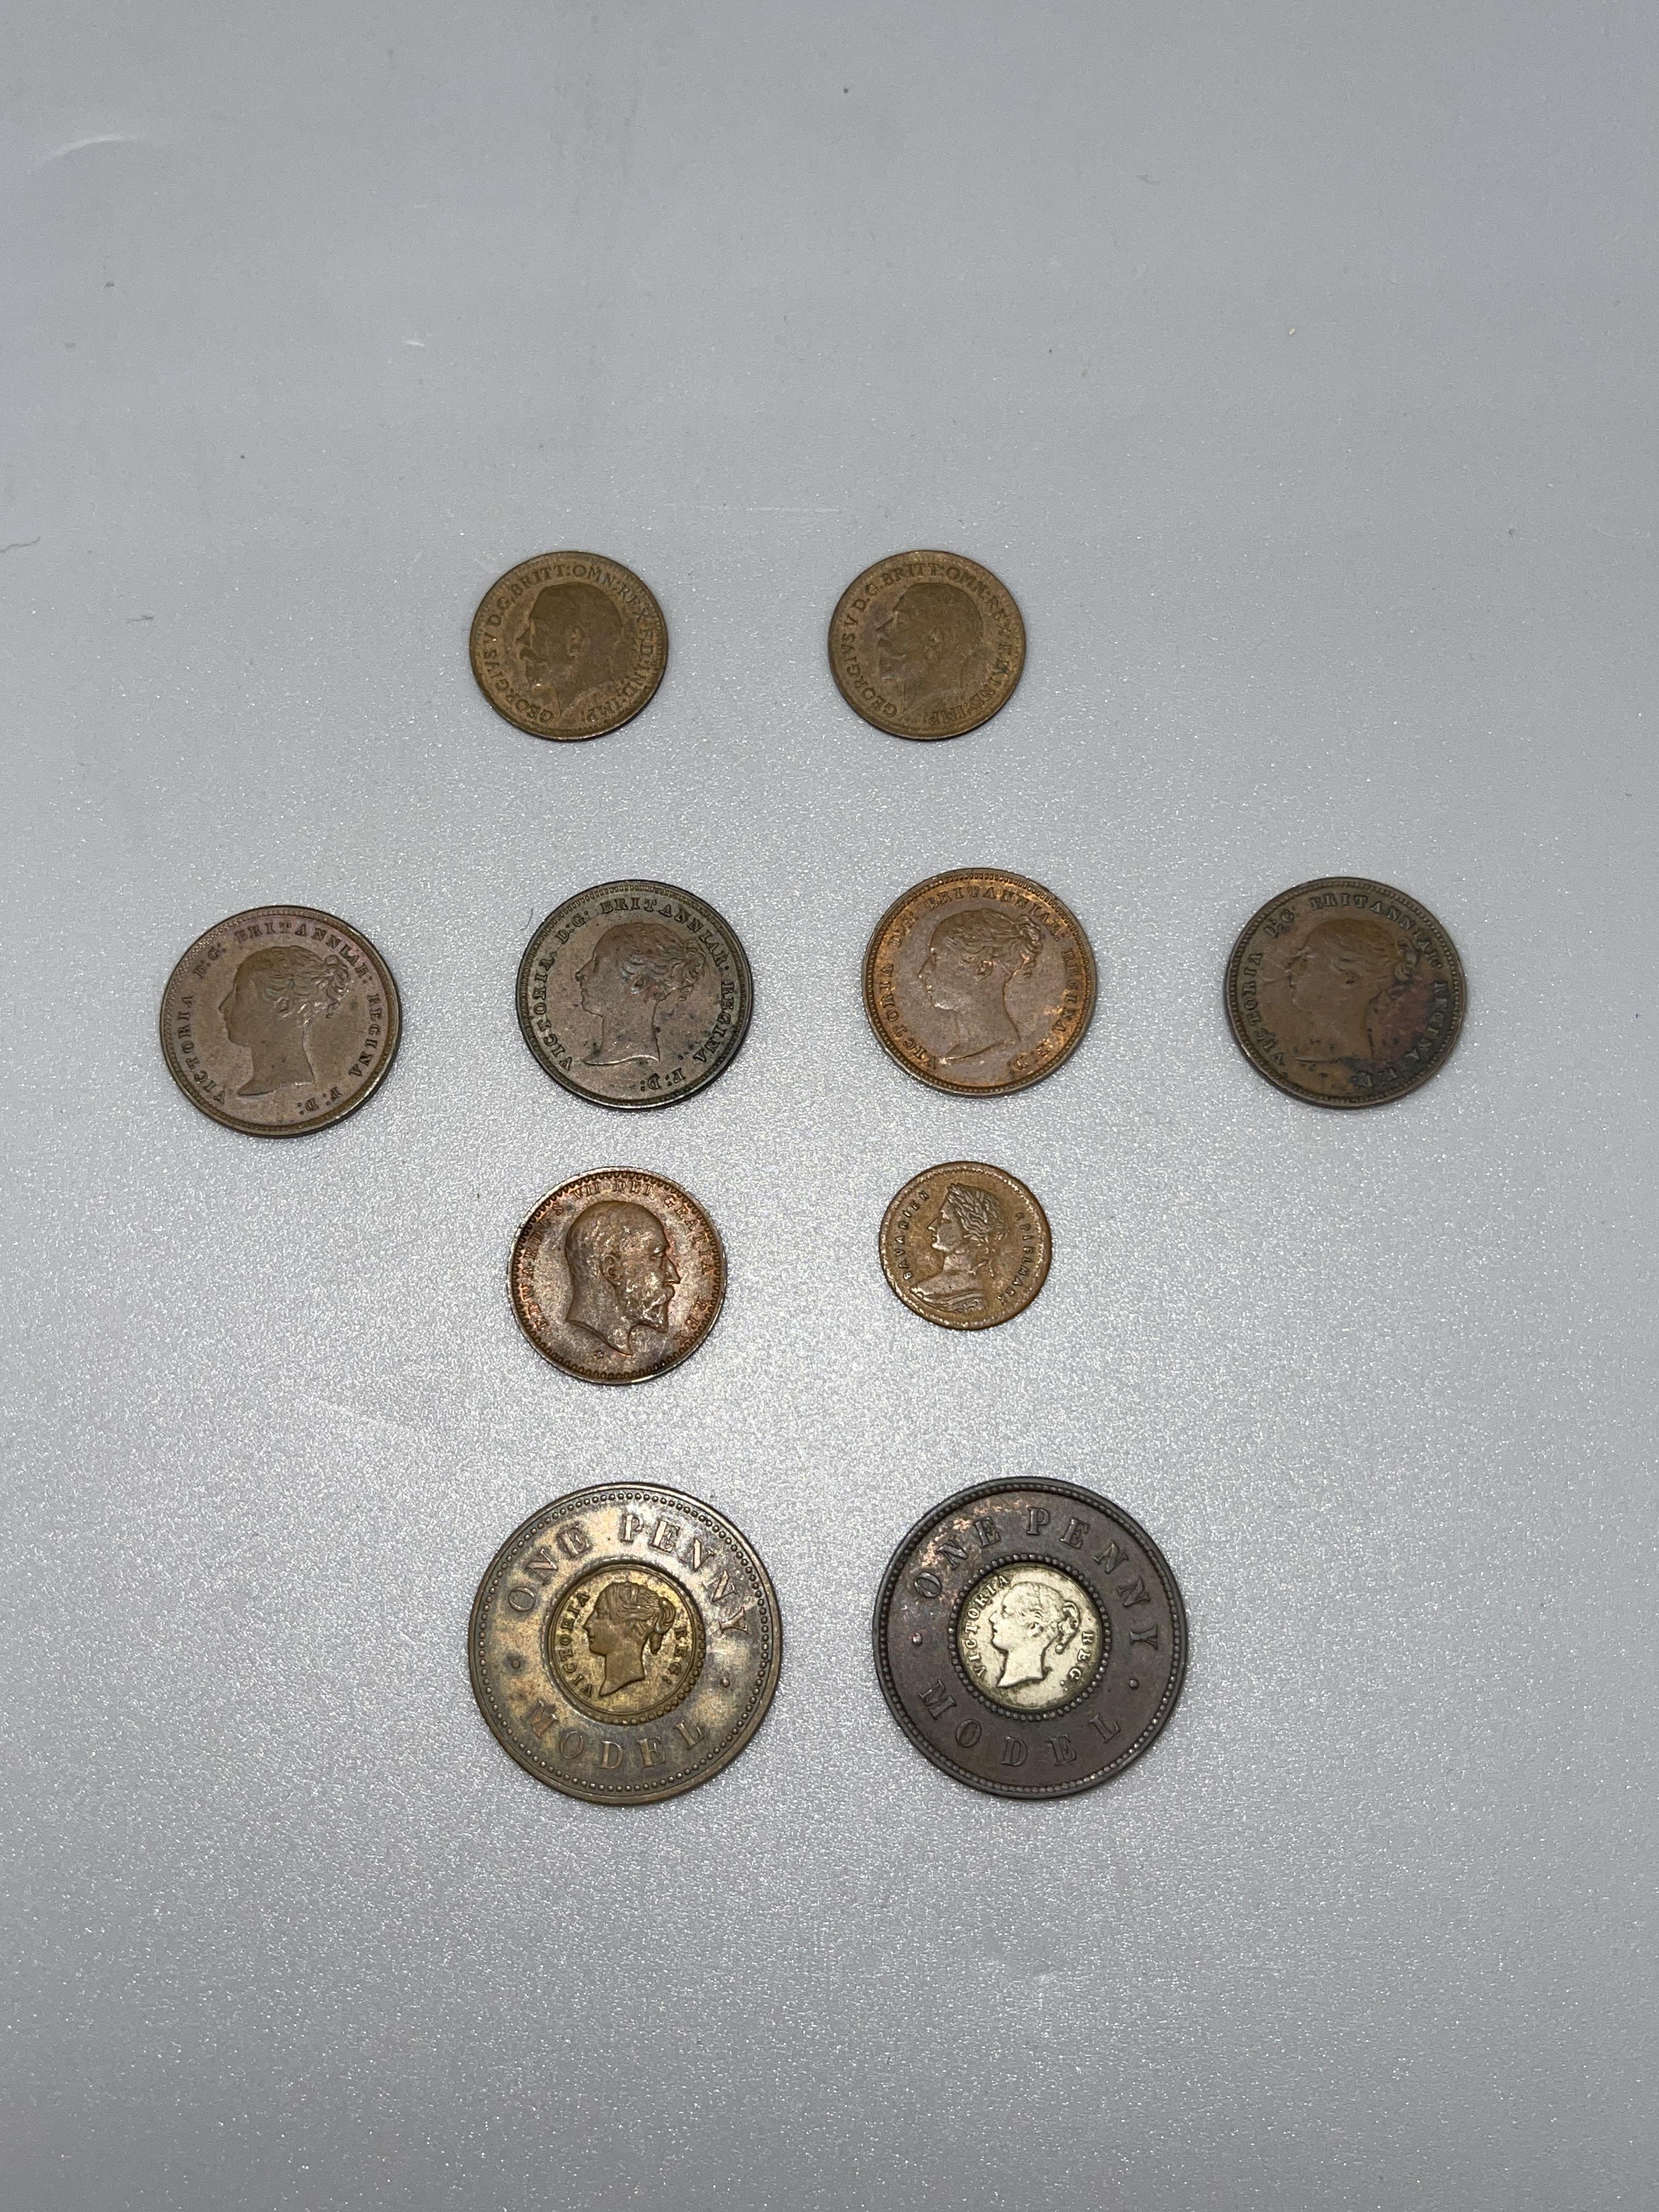 High grade Half and third farthings and model coin - Image 6 of 6